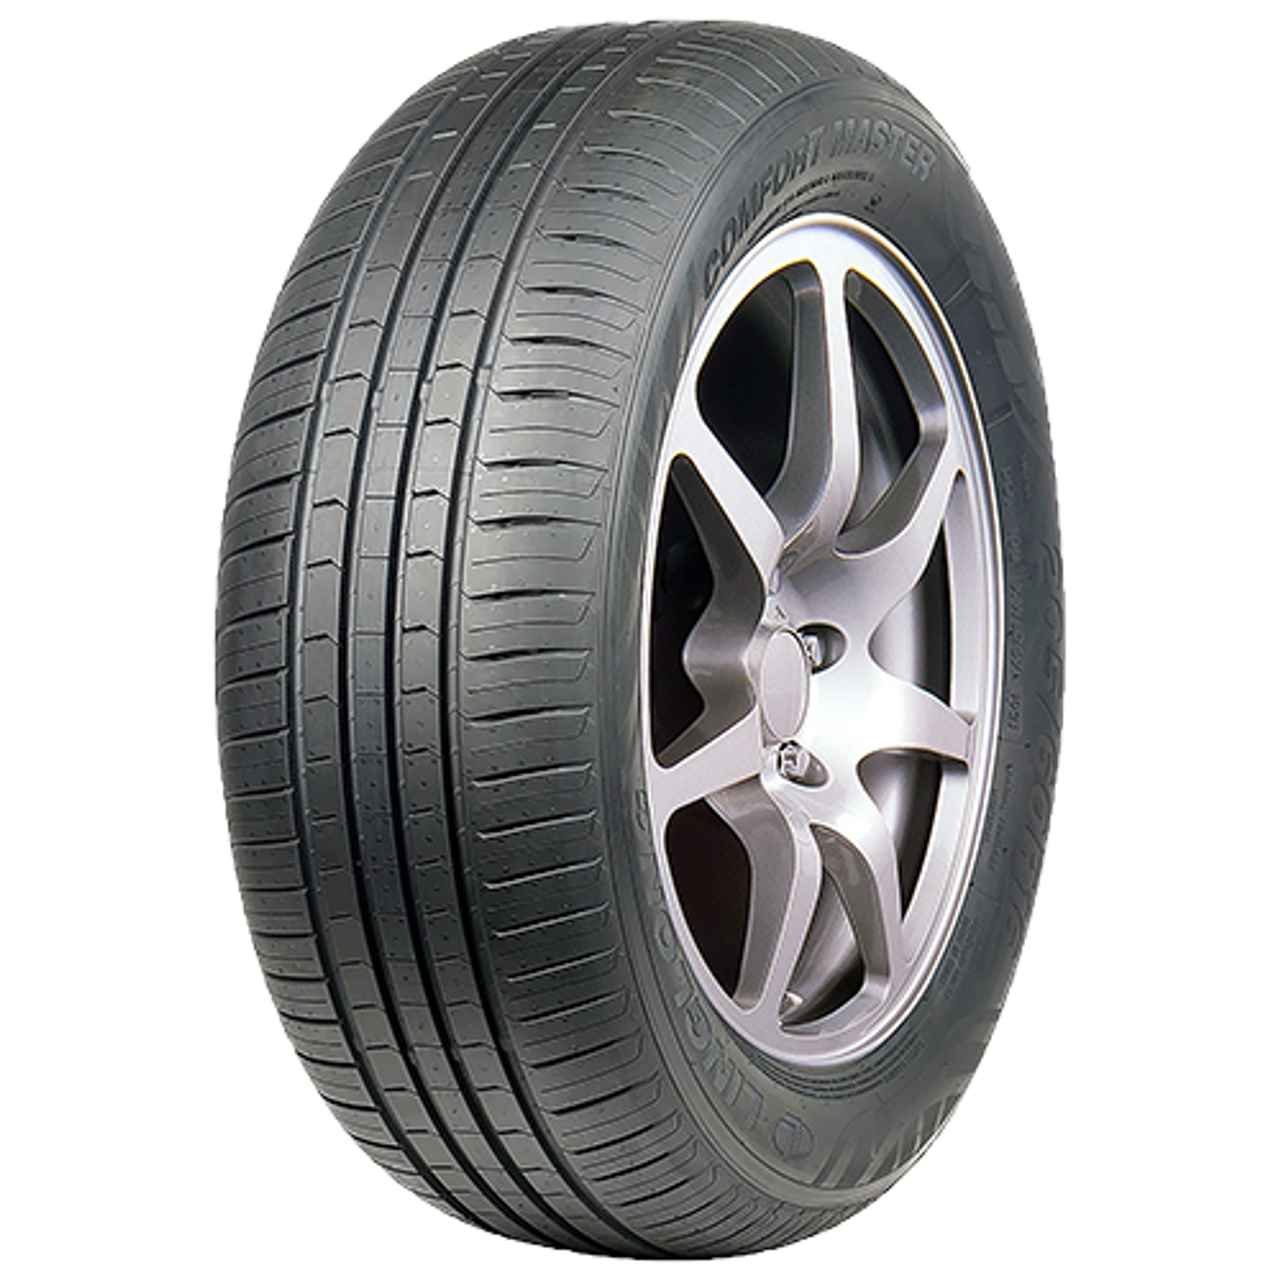 LINGLONG COMFORT MASTER 185/65R15 92T BSW XL